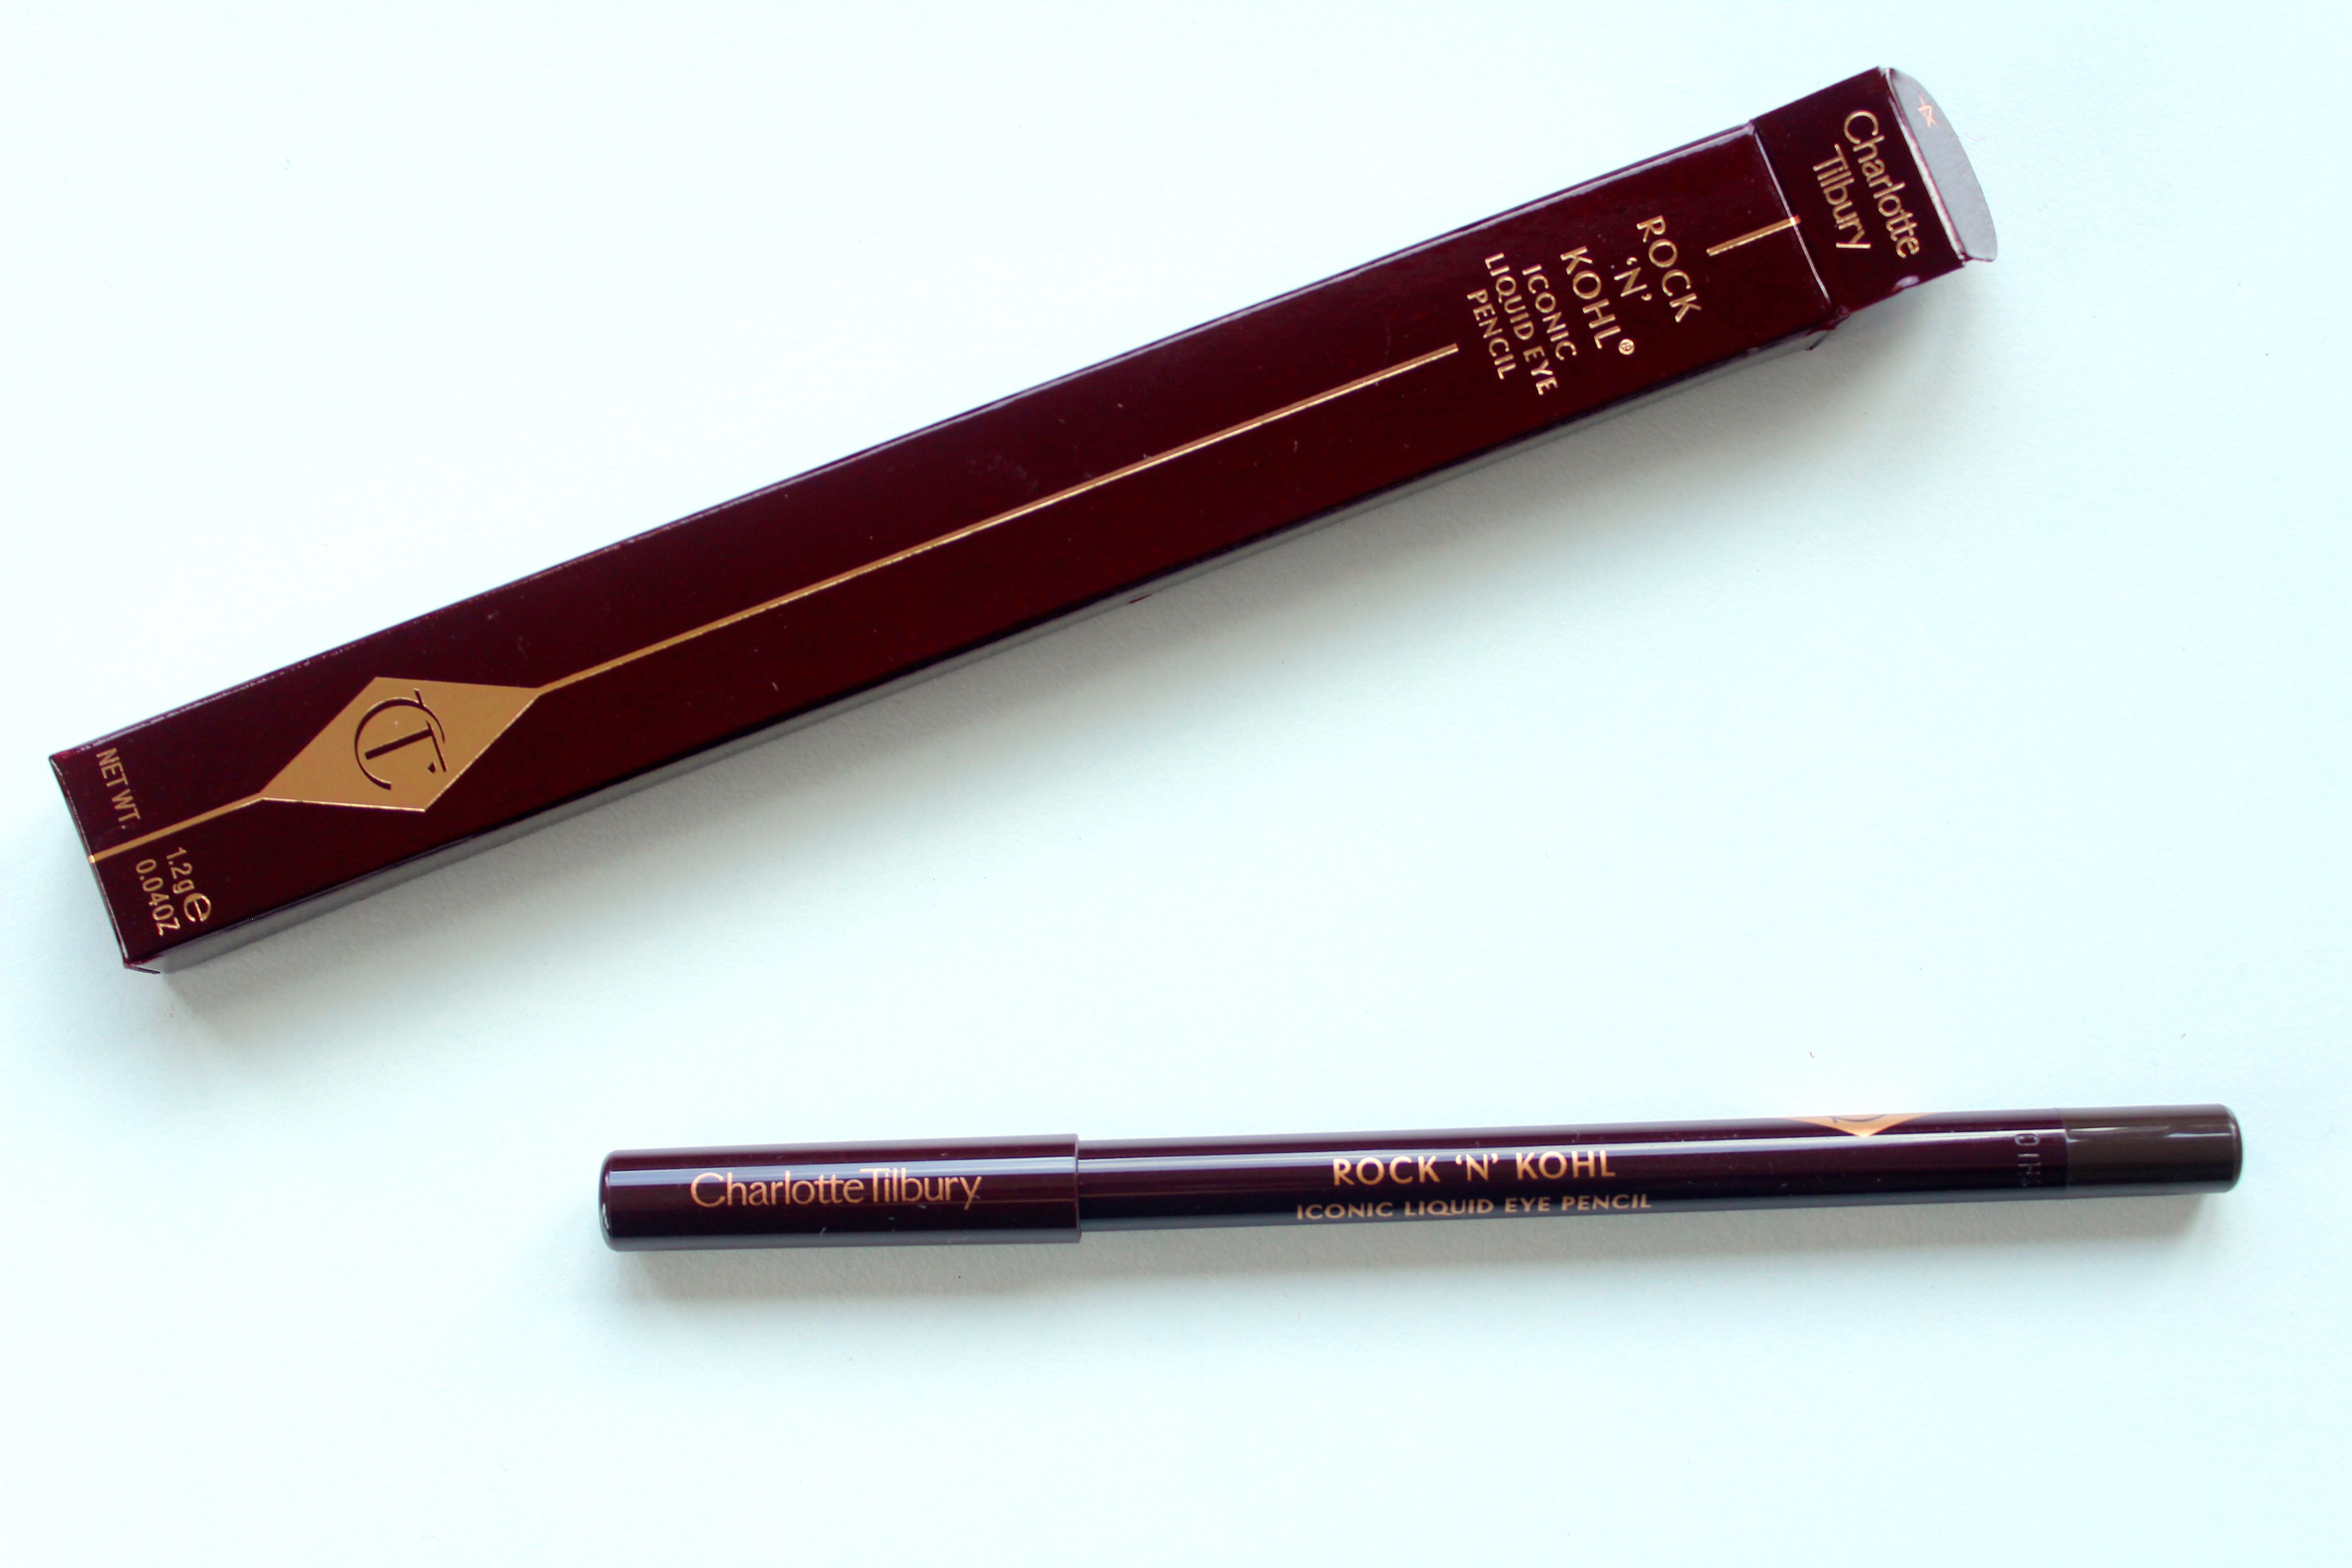 Charlotte-Tilbury-haul-and-product-review-all-in-one-Rock-'n'-kohl-iconic-liquid-eye-pencil-in-barbarella-brown-and-packaging-by-face-made-up-facemadeup